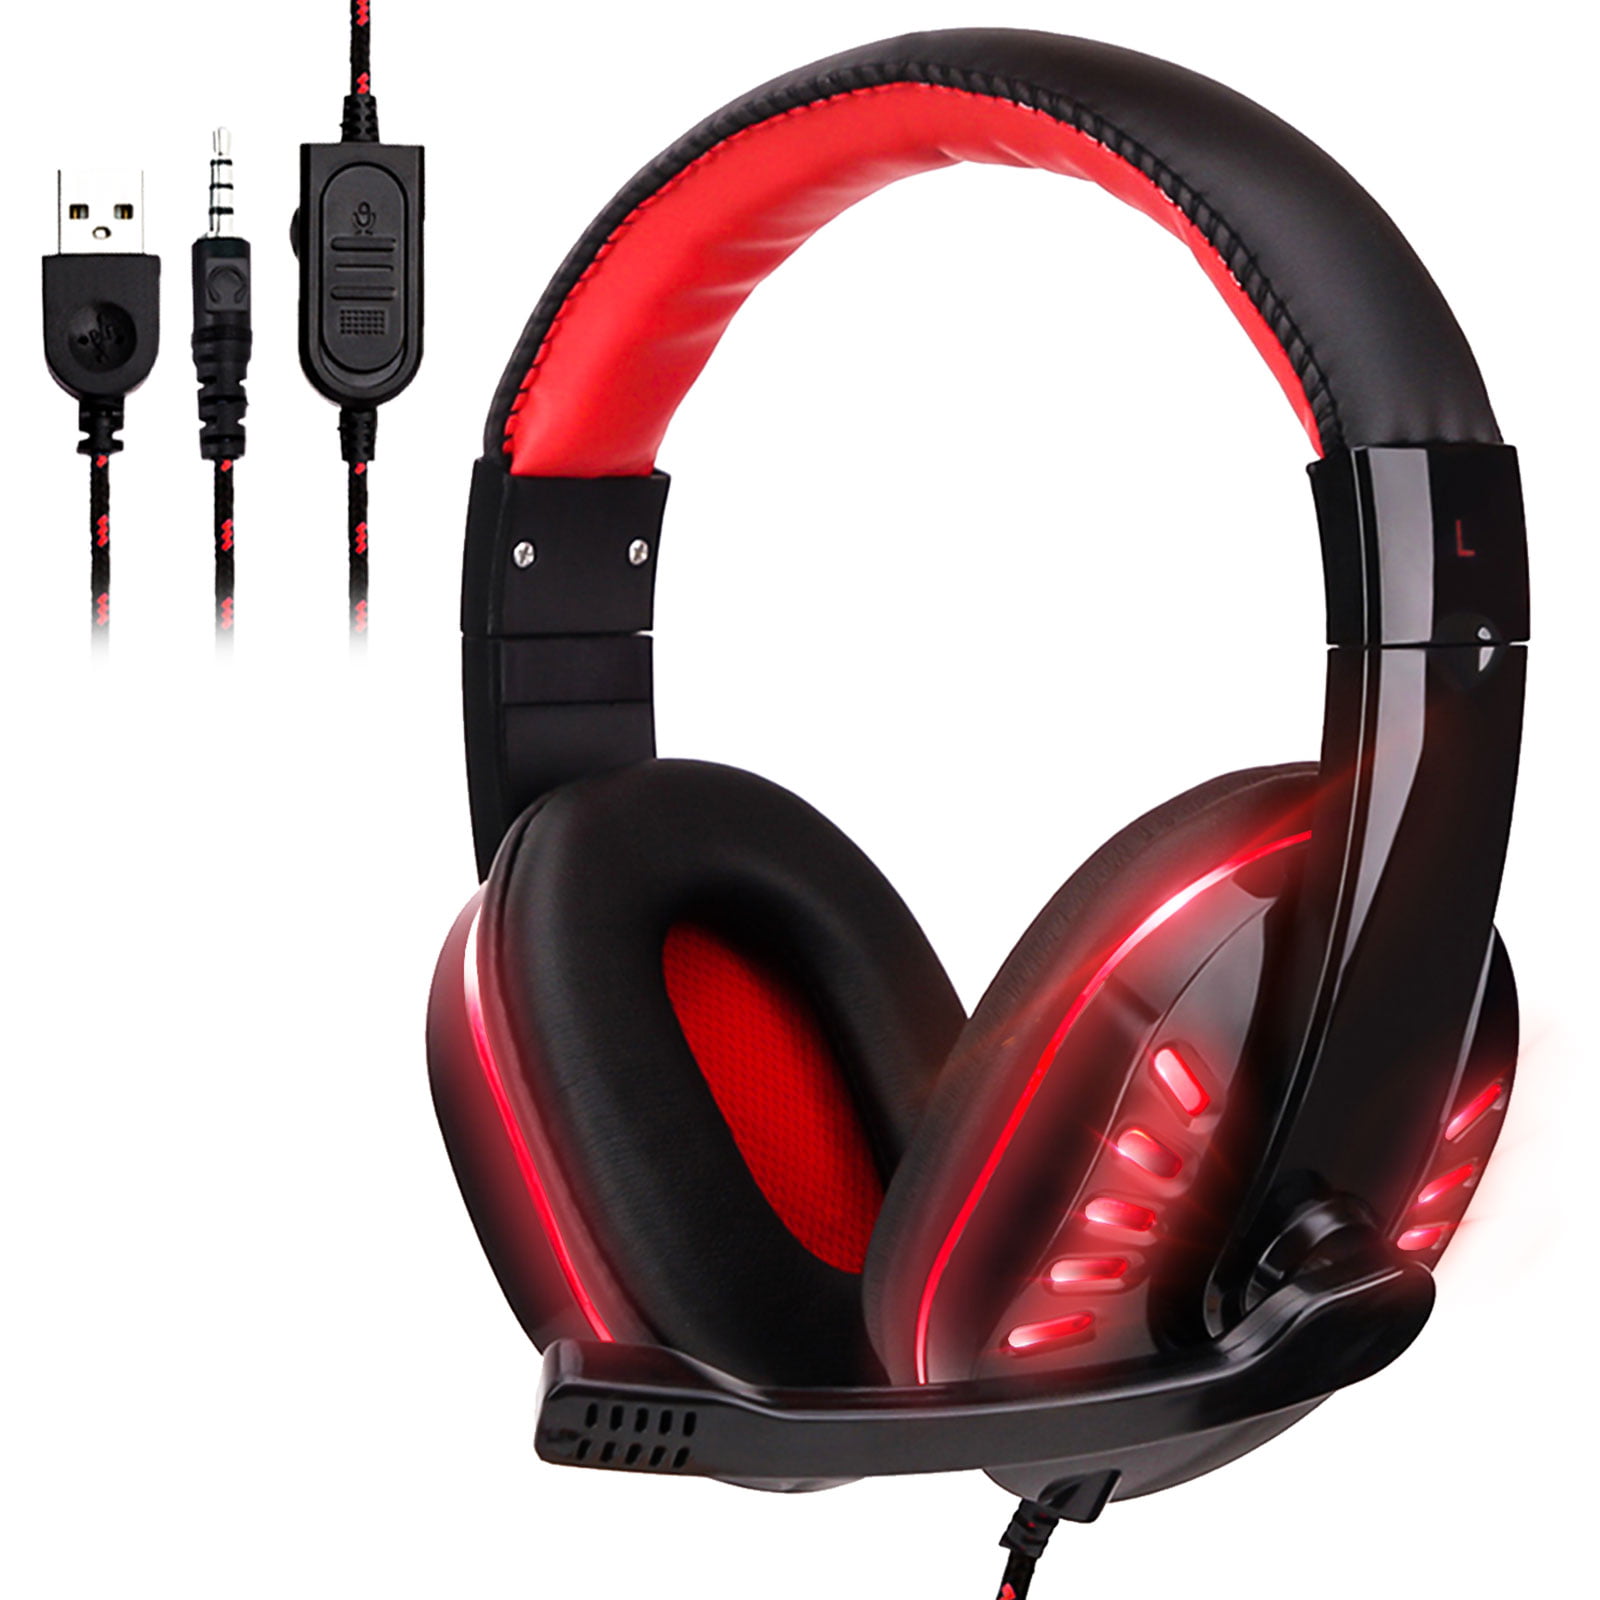 Gaming Headset with Mic for PS4, PC, Xbox One, EEEKit Surround Sound Noise Cancelling Over Ear Headphones with Soft Memory Ear Pads Compatible with Laptop Tablet Mobile Phone